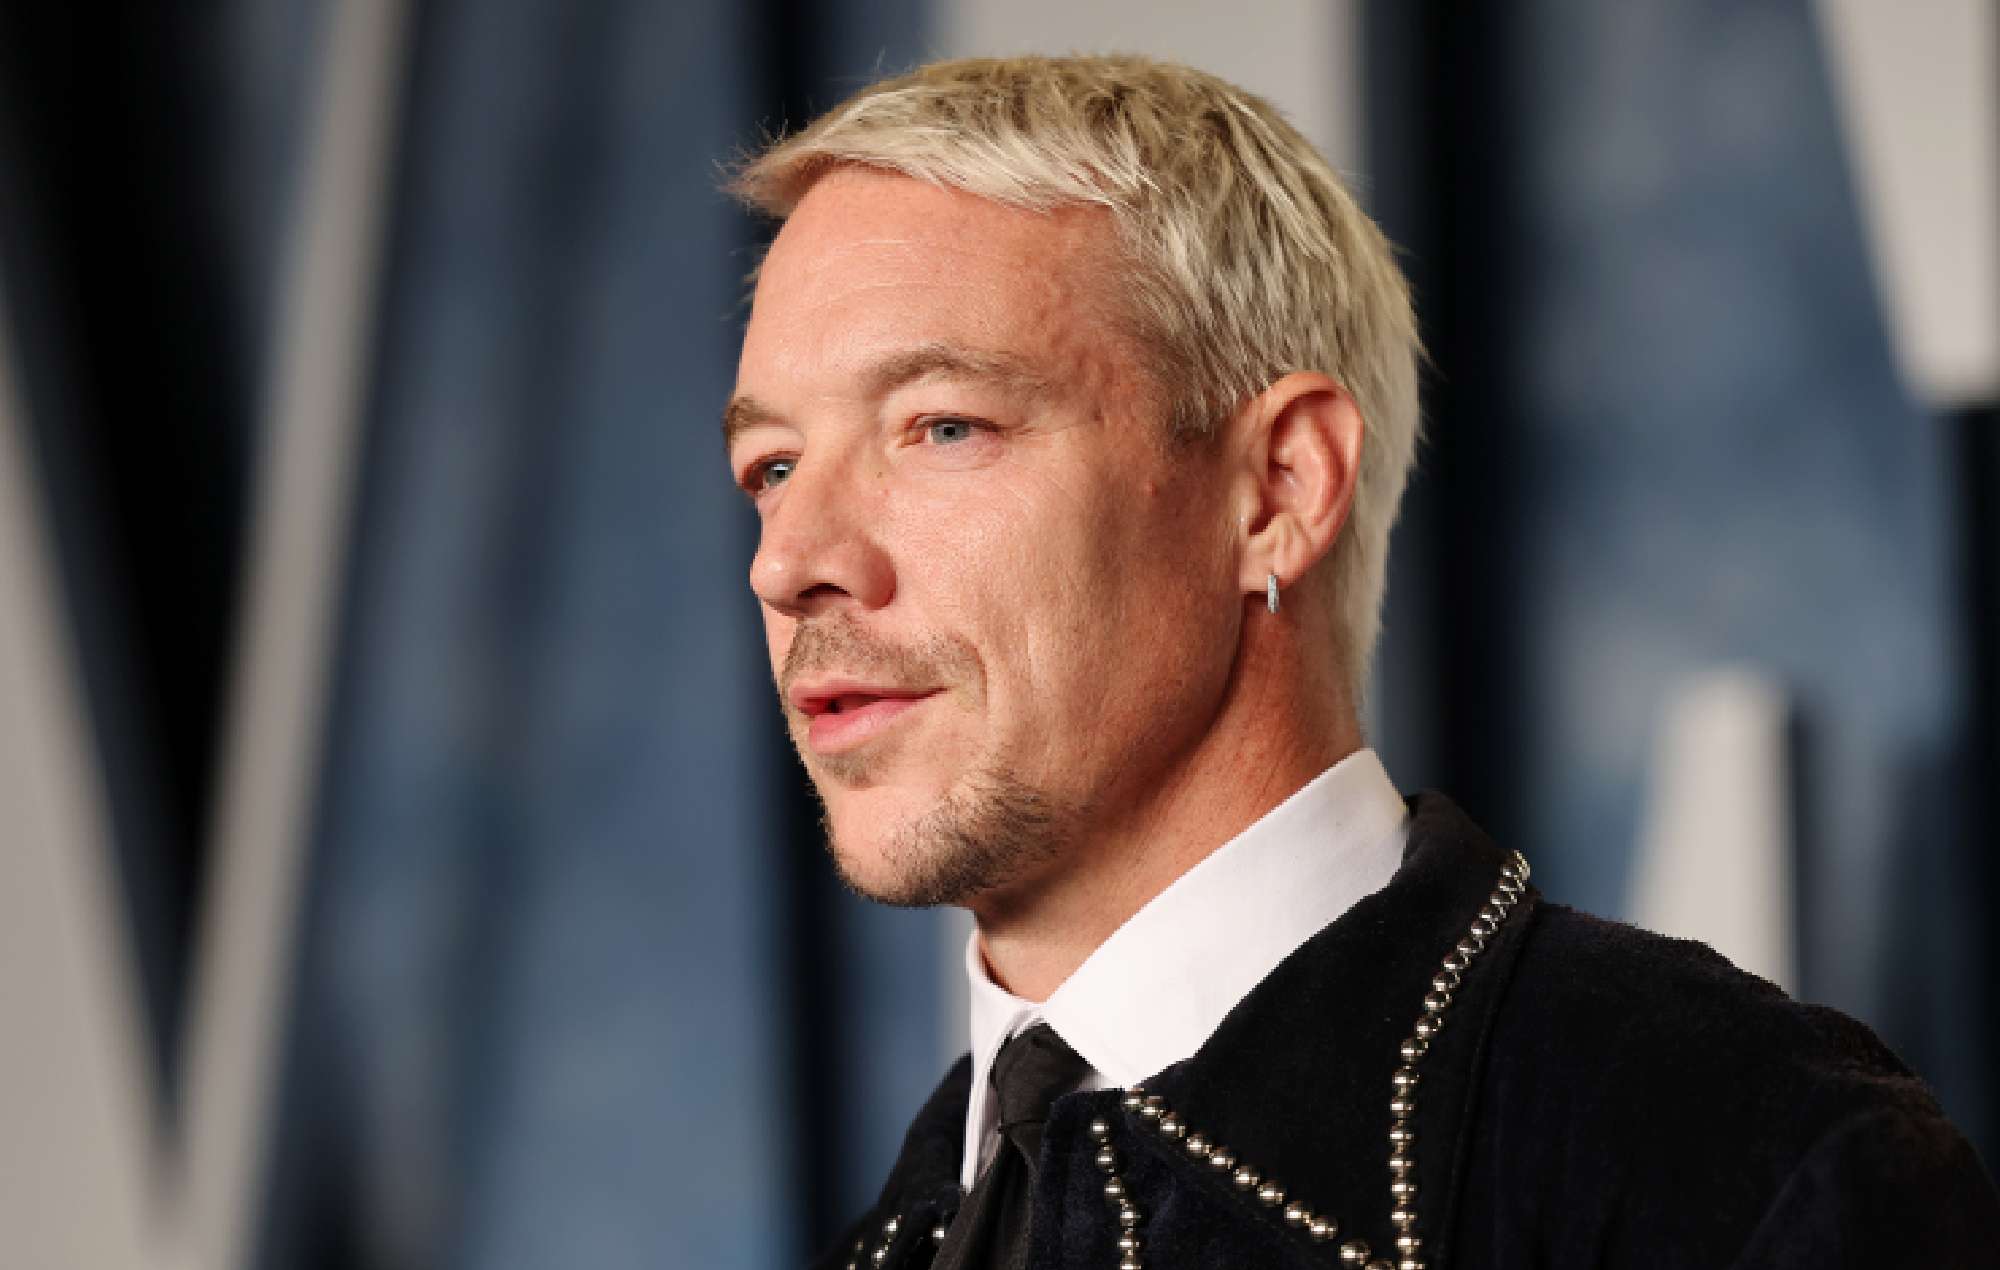 Diplo is being sued for distributing revenge porn in new lawsuit